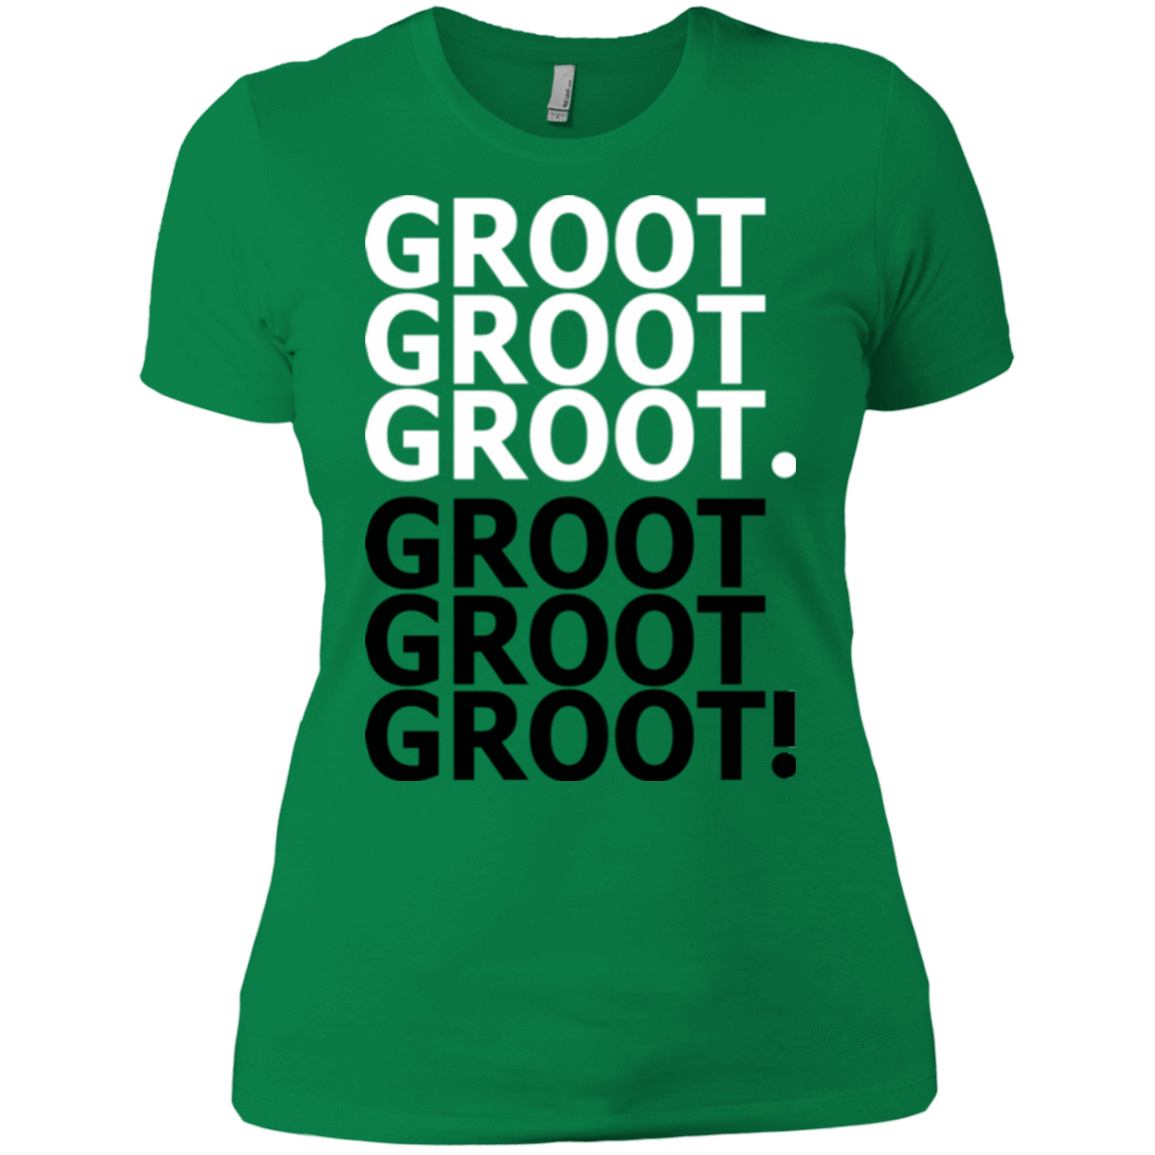 T-Shirts Kelly Green / X-Small Get over it Groot Women's Premium T-Shirt